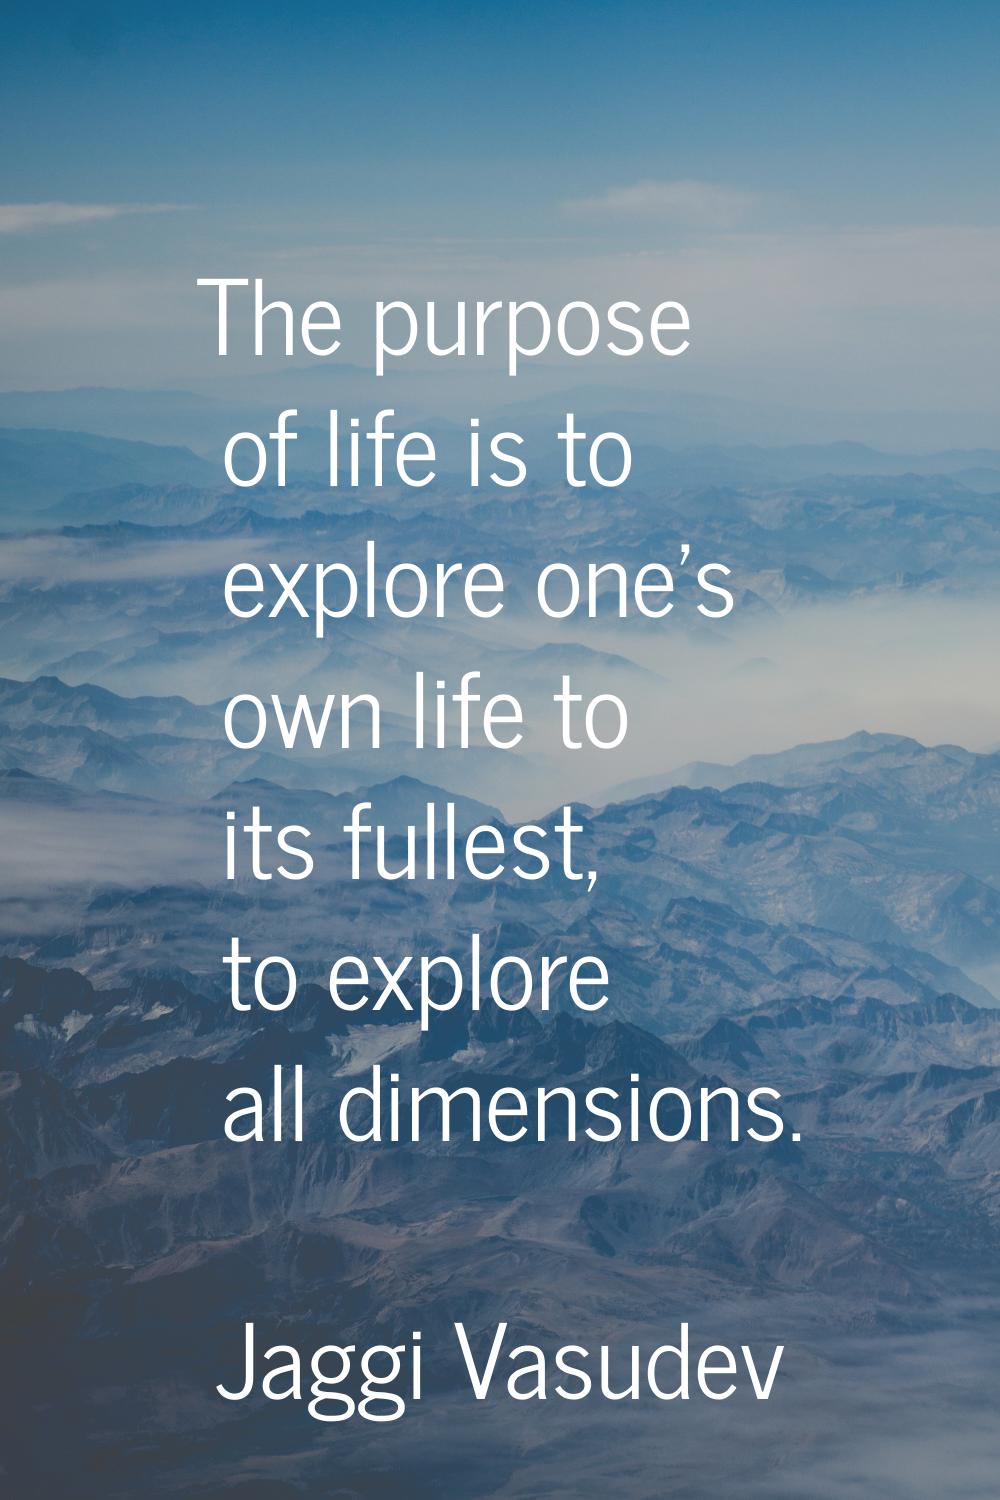 The purpose of life is to explore one's own life to its fullest, to explore all dimensions.